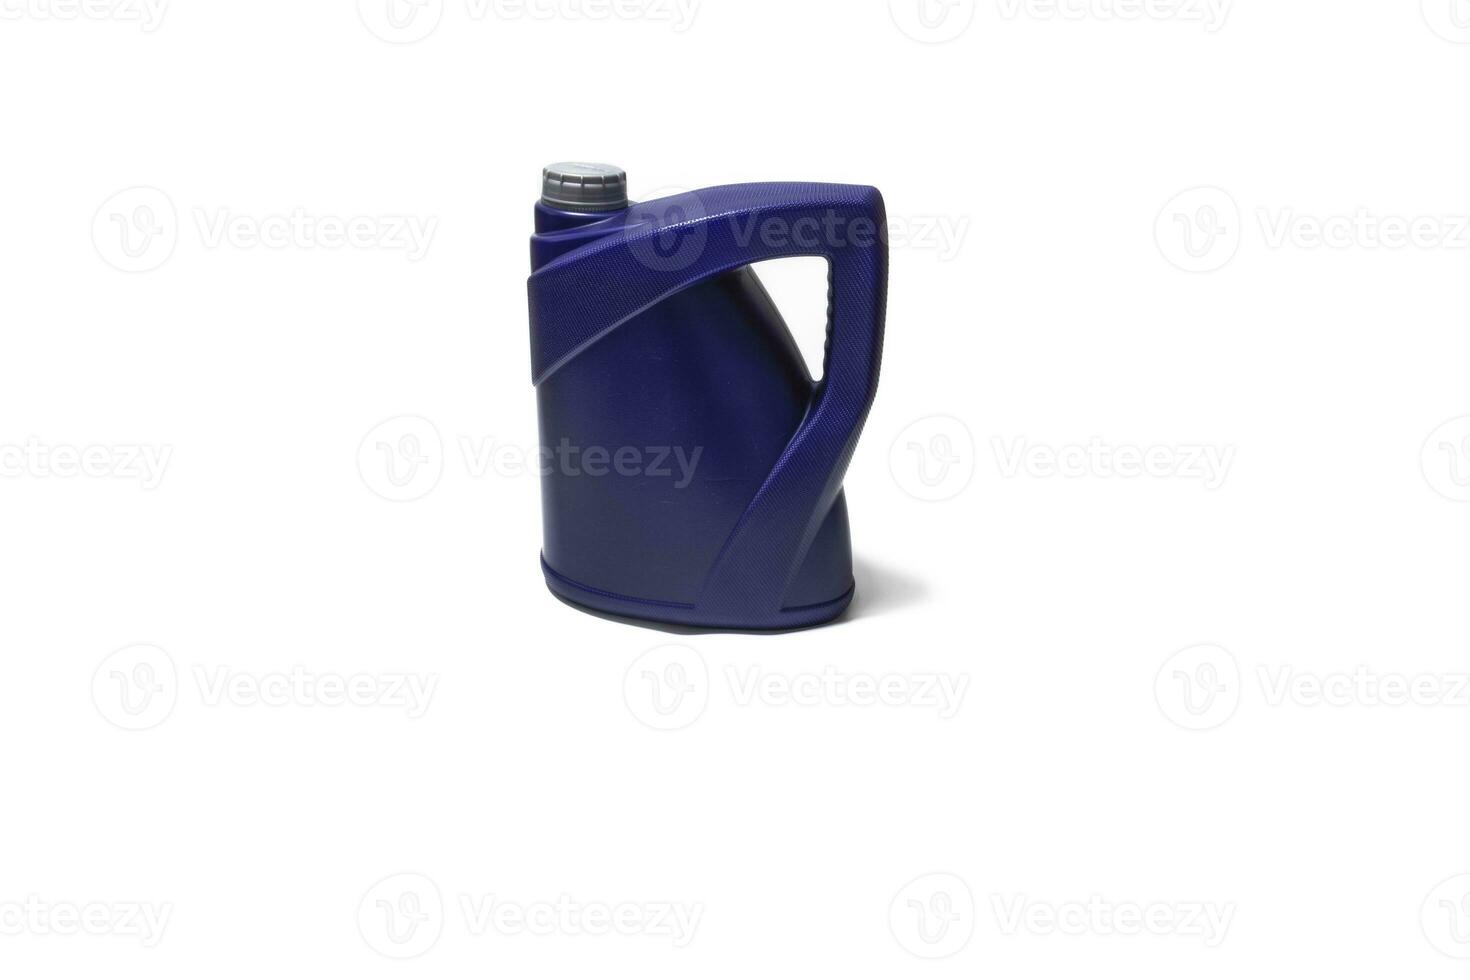 Motor oil bottle isolated on a white background. Motor oil is made up of a mineral or synthetic base and additives that provide it with the necessary properties to protect the engine. photo